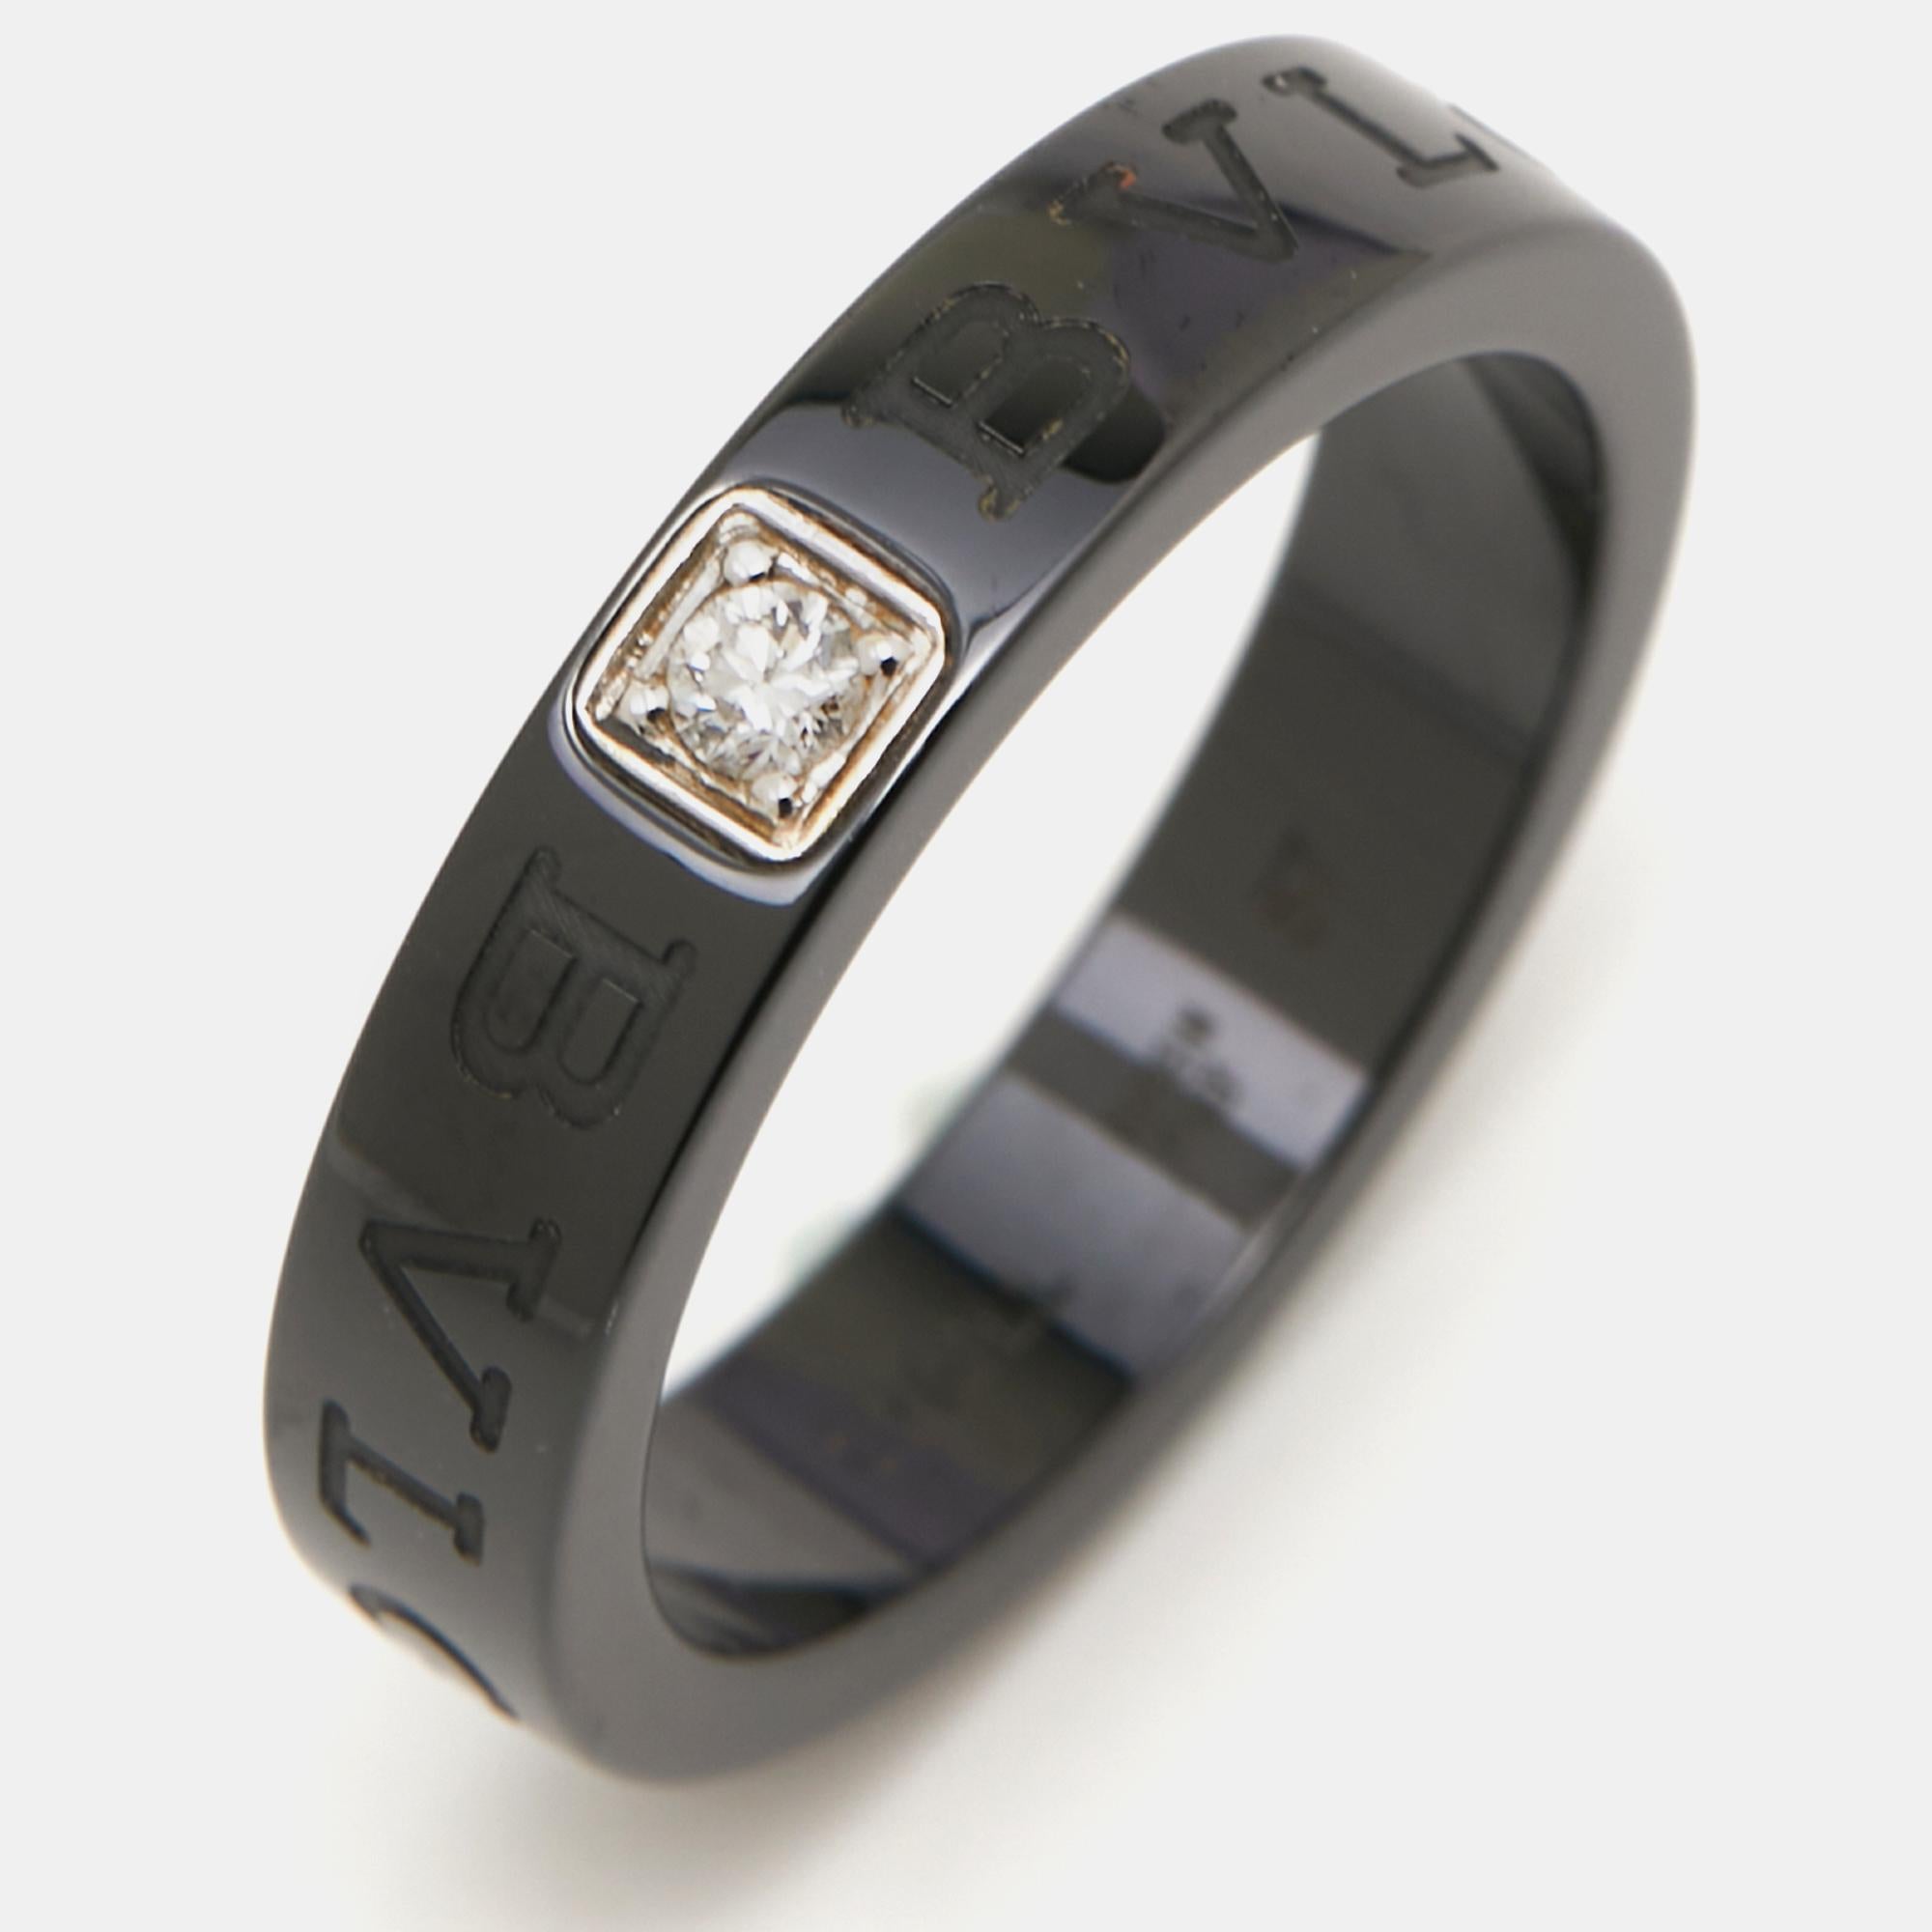 Elegant and alluring, this Bvlgari ring is sure to become a staple piece in your jewelry collection. Constructed using black ceramic, it has brand engravings and a diamond for a stunning look.

